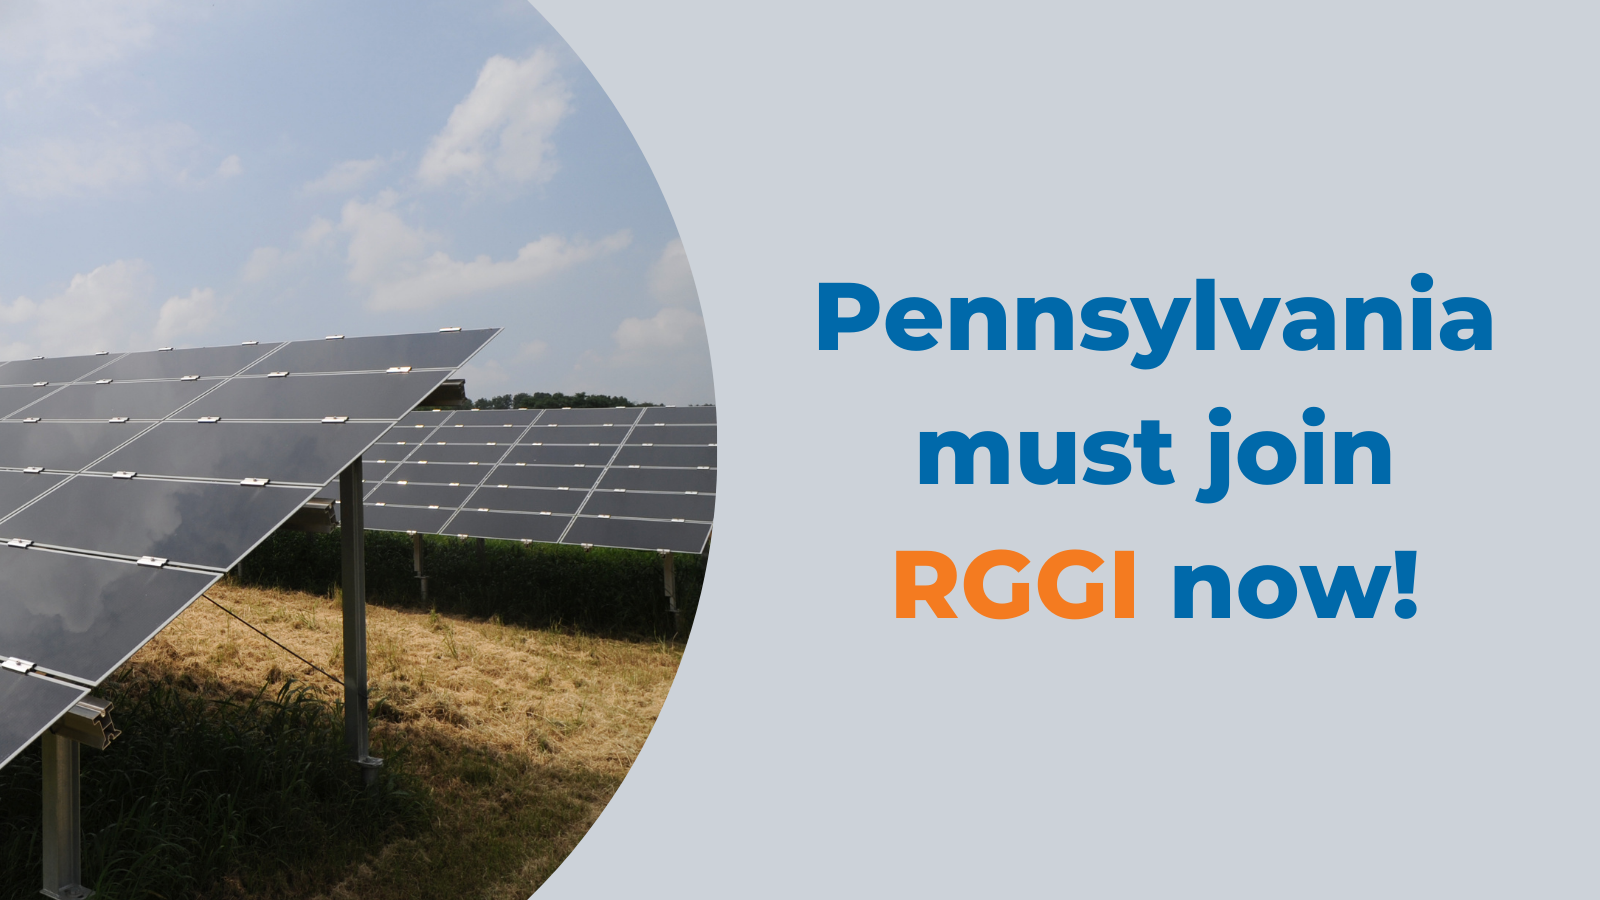 RGGI is the right choice for Pennsylvania